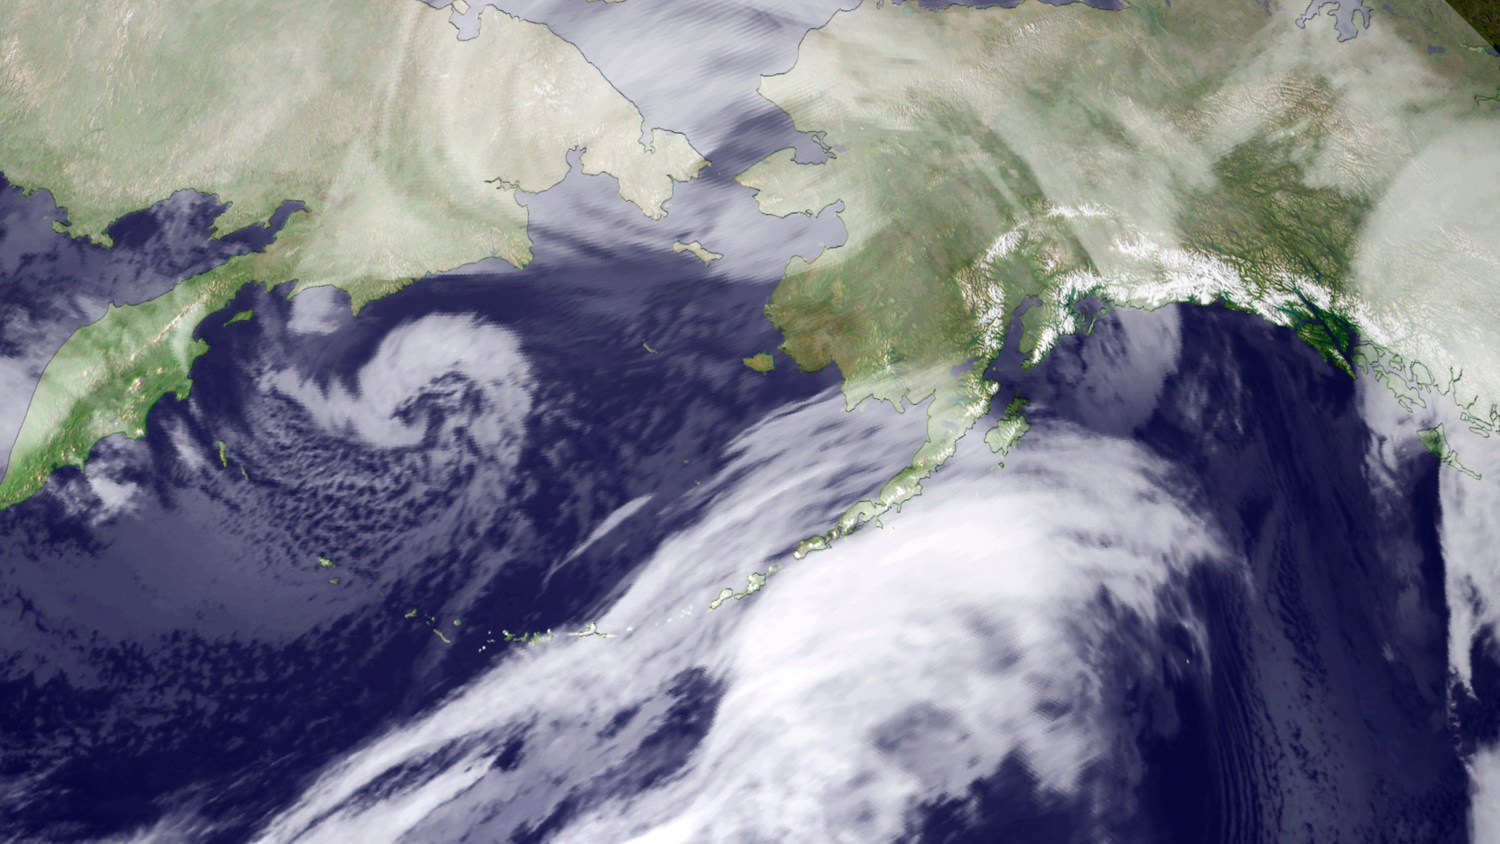 This composite infrared imagery from NOAA weather satellites taken November 9, 2011 shows the storm moving over the Bering Strait region, bringing heavy winds and flooding to western Alaska. The storm, moving inland from the Aleutian Islands, was expected to bring hurricane-force winds with gusts up to 100 miles per hour, heavy snowfall, widespread coastal flooding and severe erosion to most of Alaska's west coast, the National Weather Service said. REUTERS/NOAA/Handout (UNITED STATES - Tags: ENVIRONMENT)